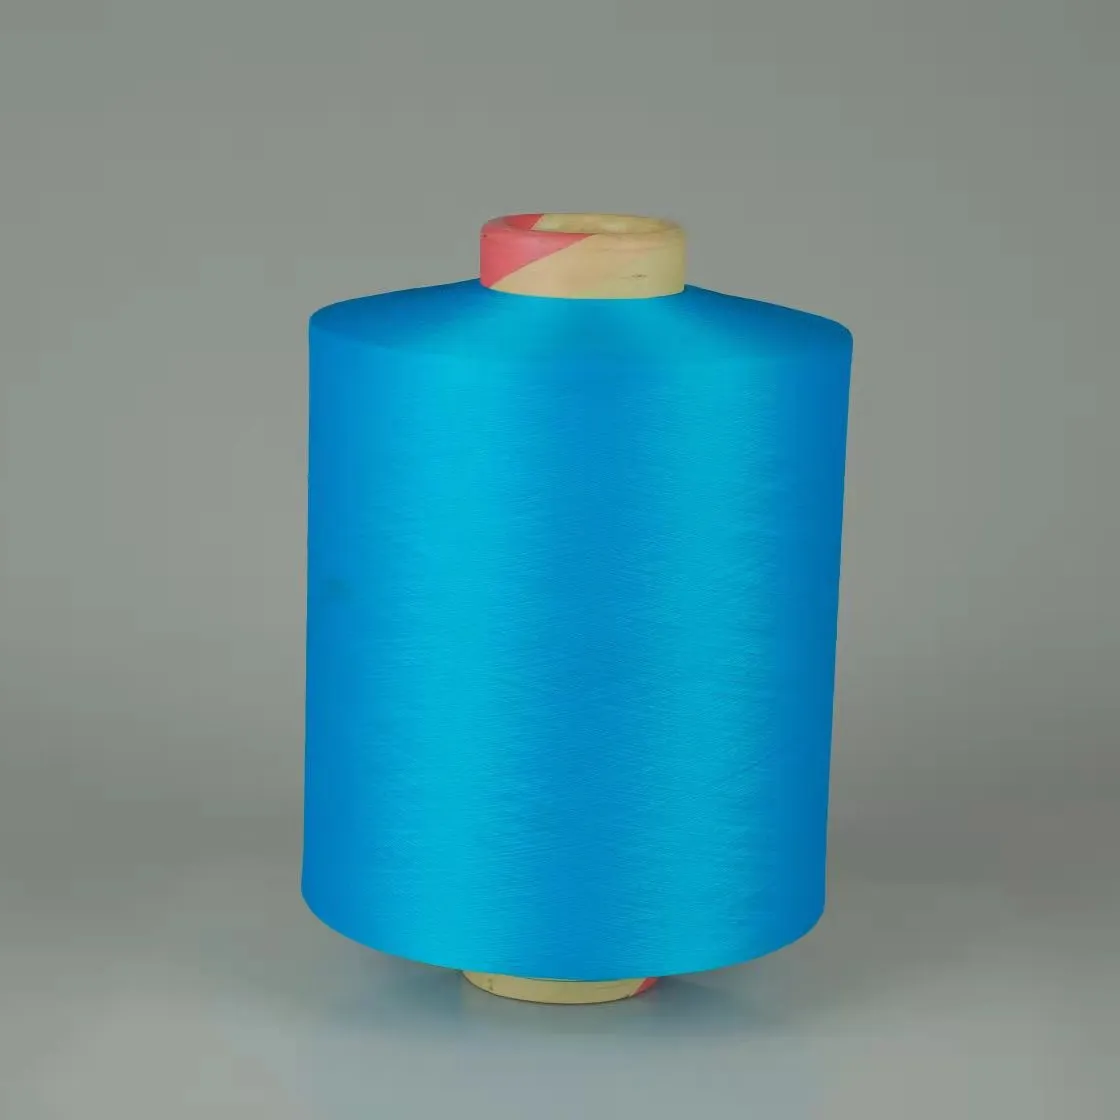 2075/3075/4075 SPANDEX COVERED YARN SPANDEX COVERED POLYESTER MACHINE COVERED YARN AIR COVERED YARN SPANDEX YANR